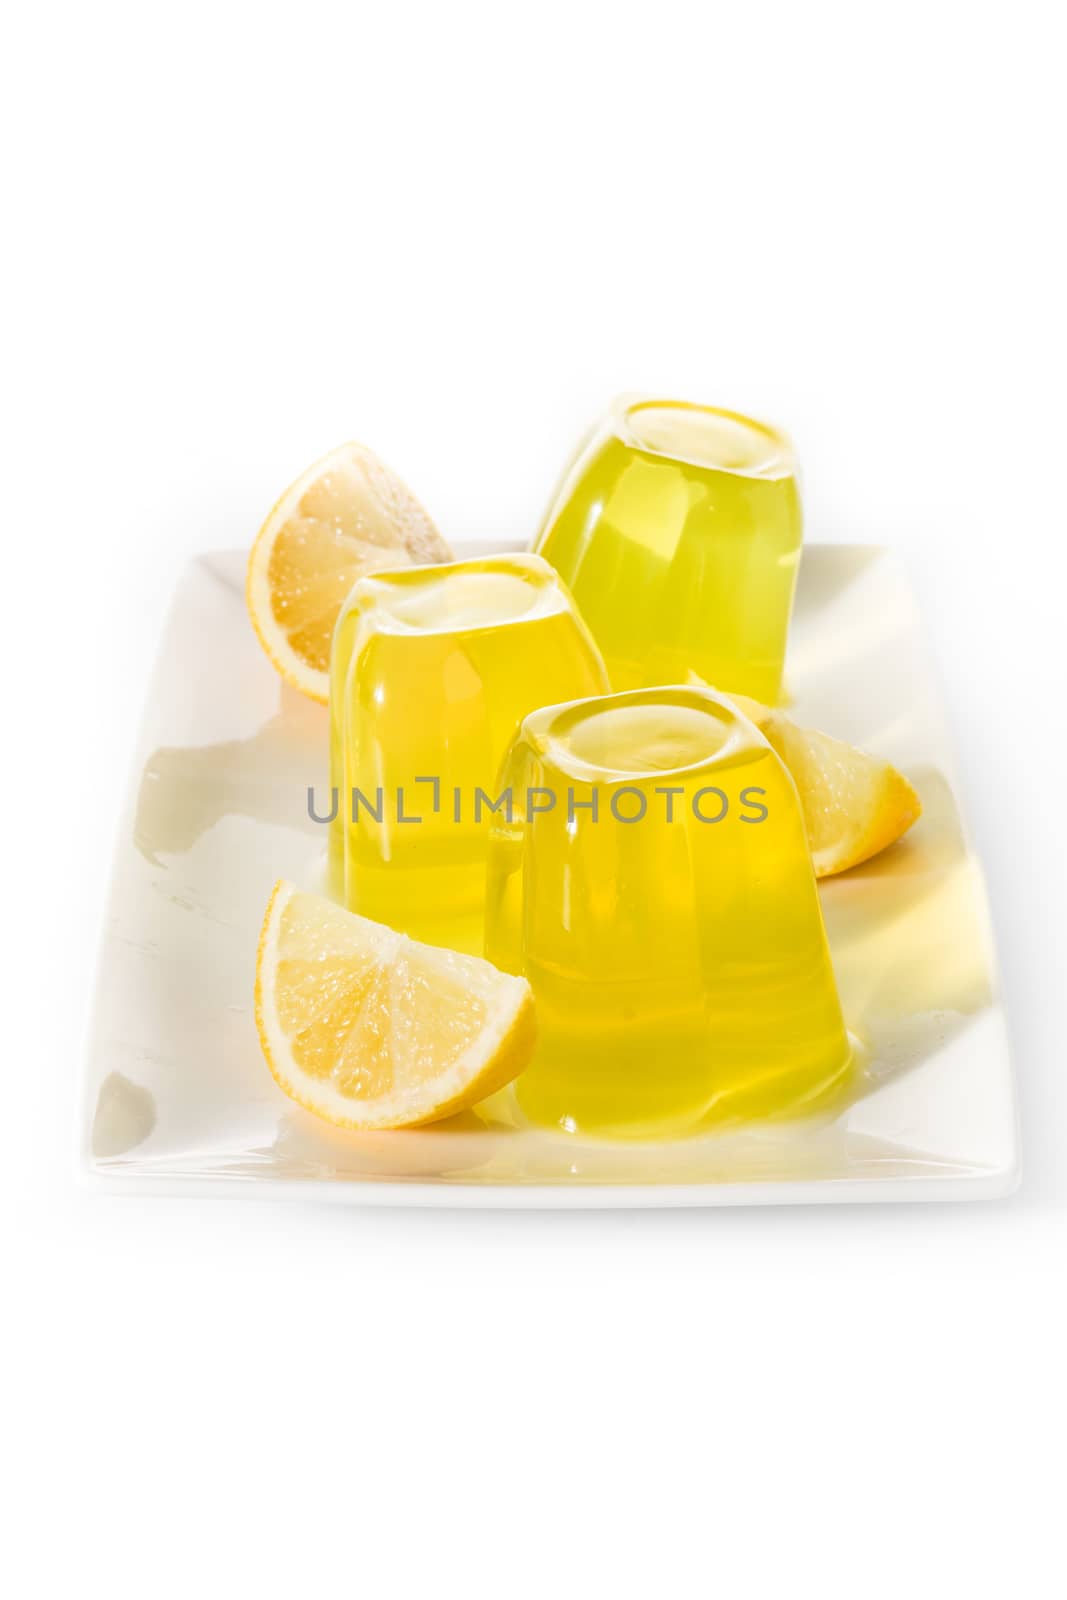 Lemon jellies on a plastic cup isolated on white background.